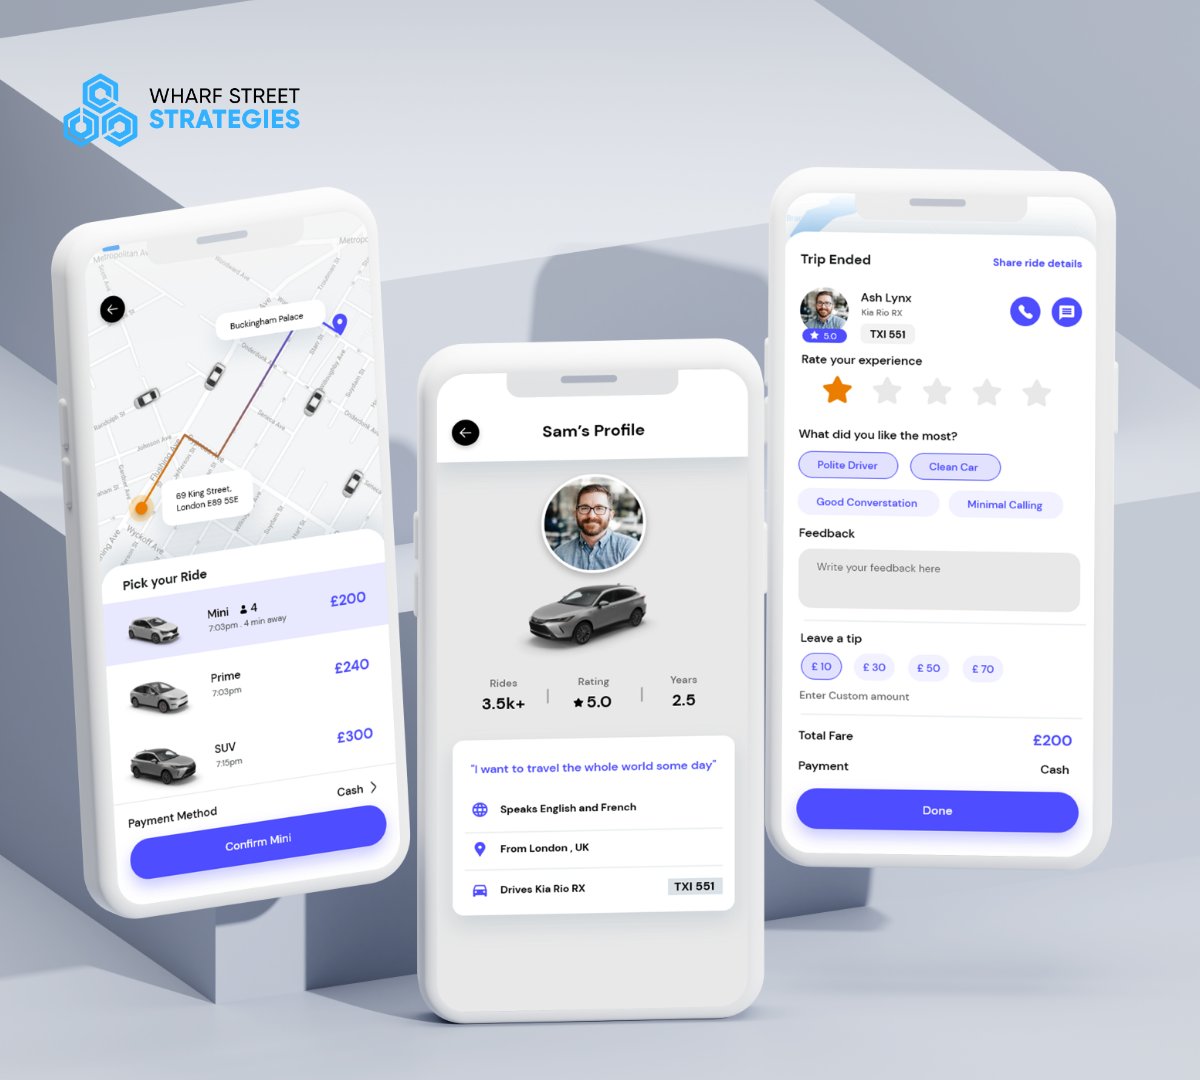 Mobile app UI/UX design | Trip Ended | Pick your Ride | Profile Design is a plan for arranging elements in such a way as best to accomplish a particular purpose. Contact us for more details - info@wharfstreetstrategies.com #wharfstreet #ui #ux #uidesign #uiux #uiuxdesign